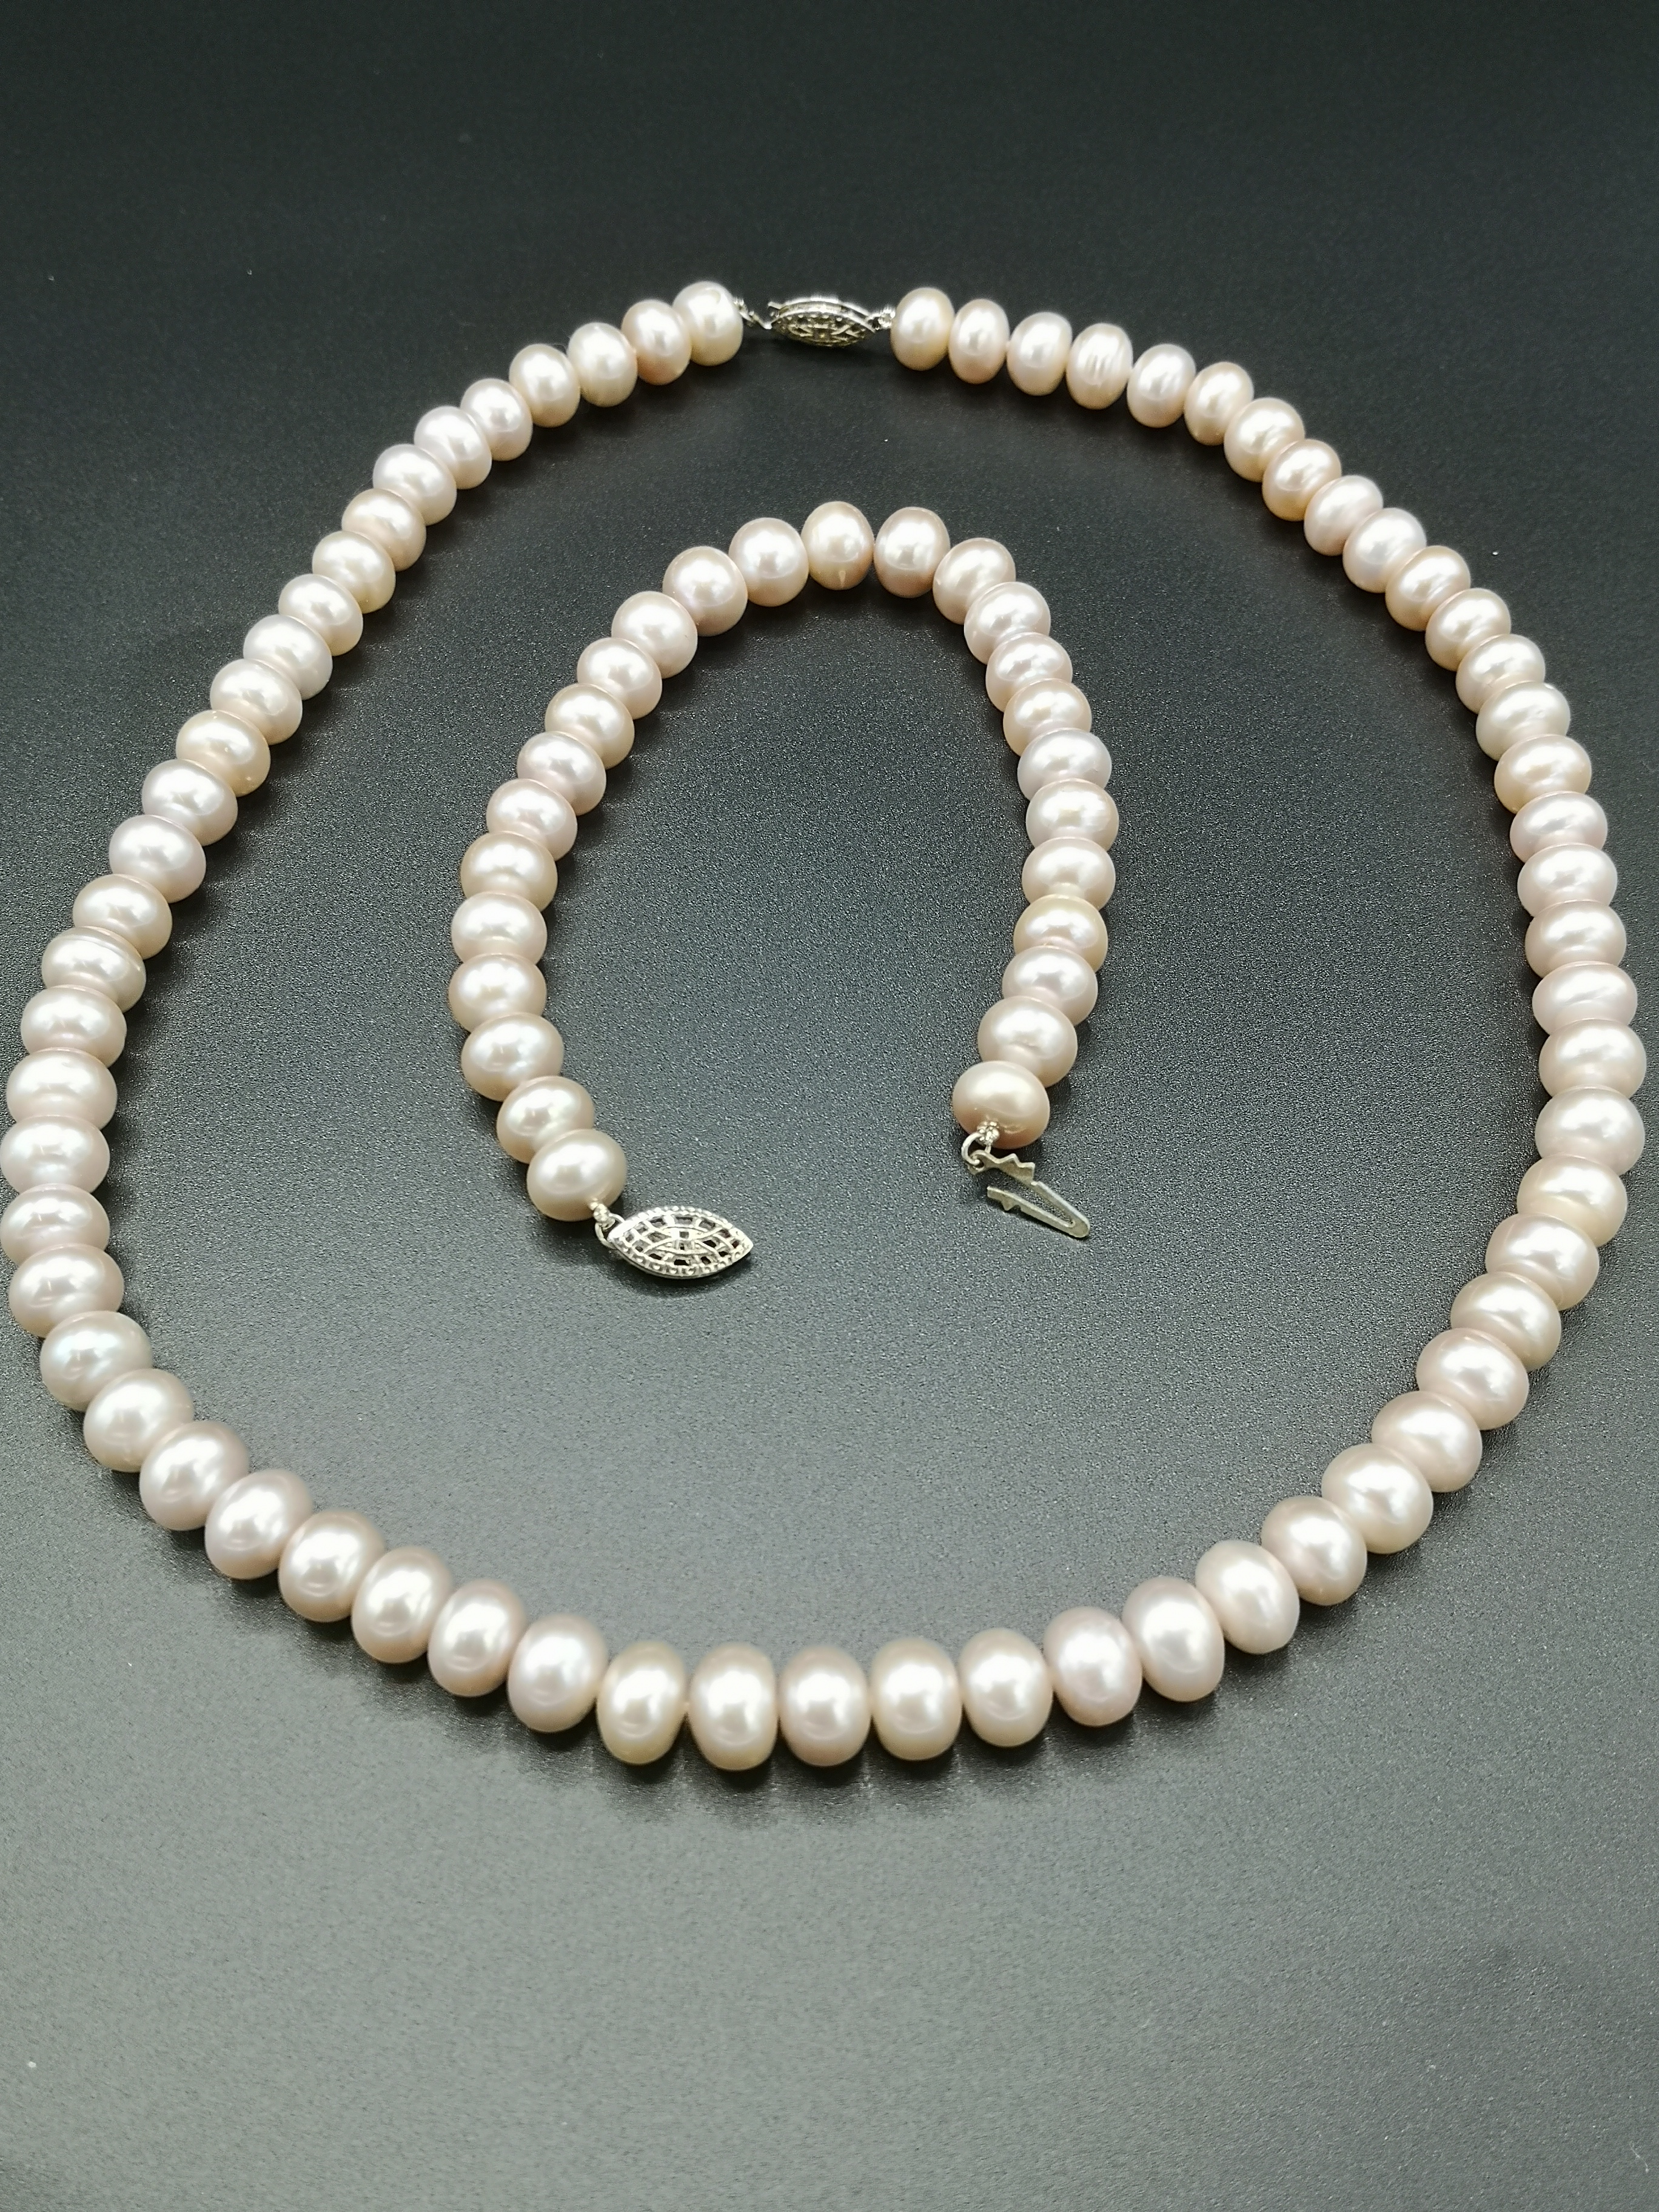 Pearl necklace with matching bracelet - Image 3 of 5